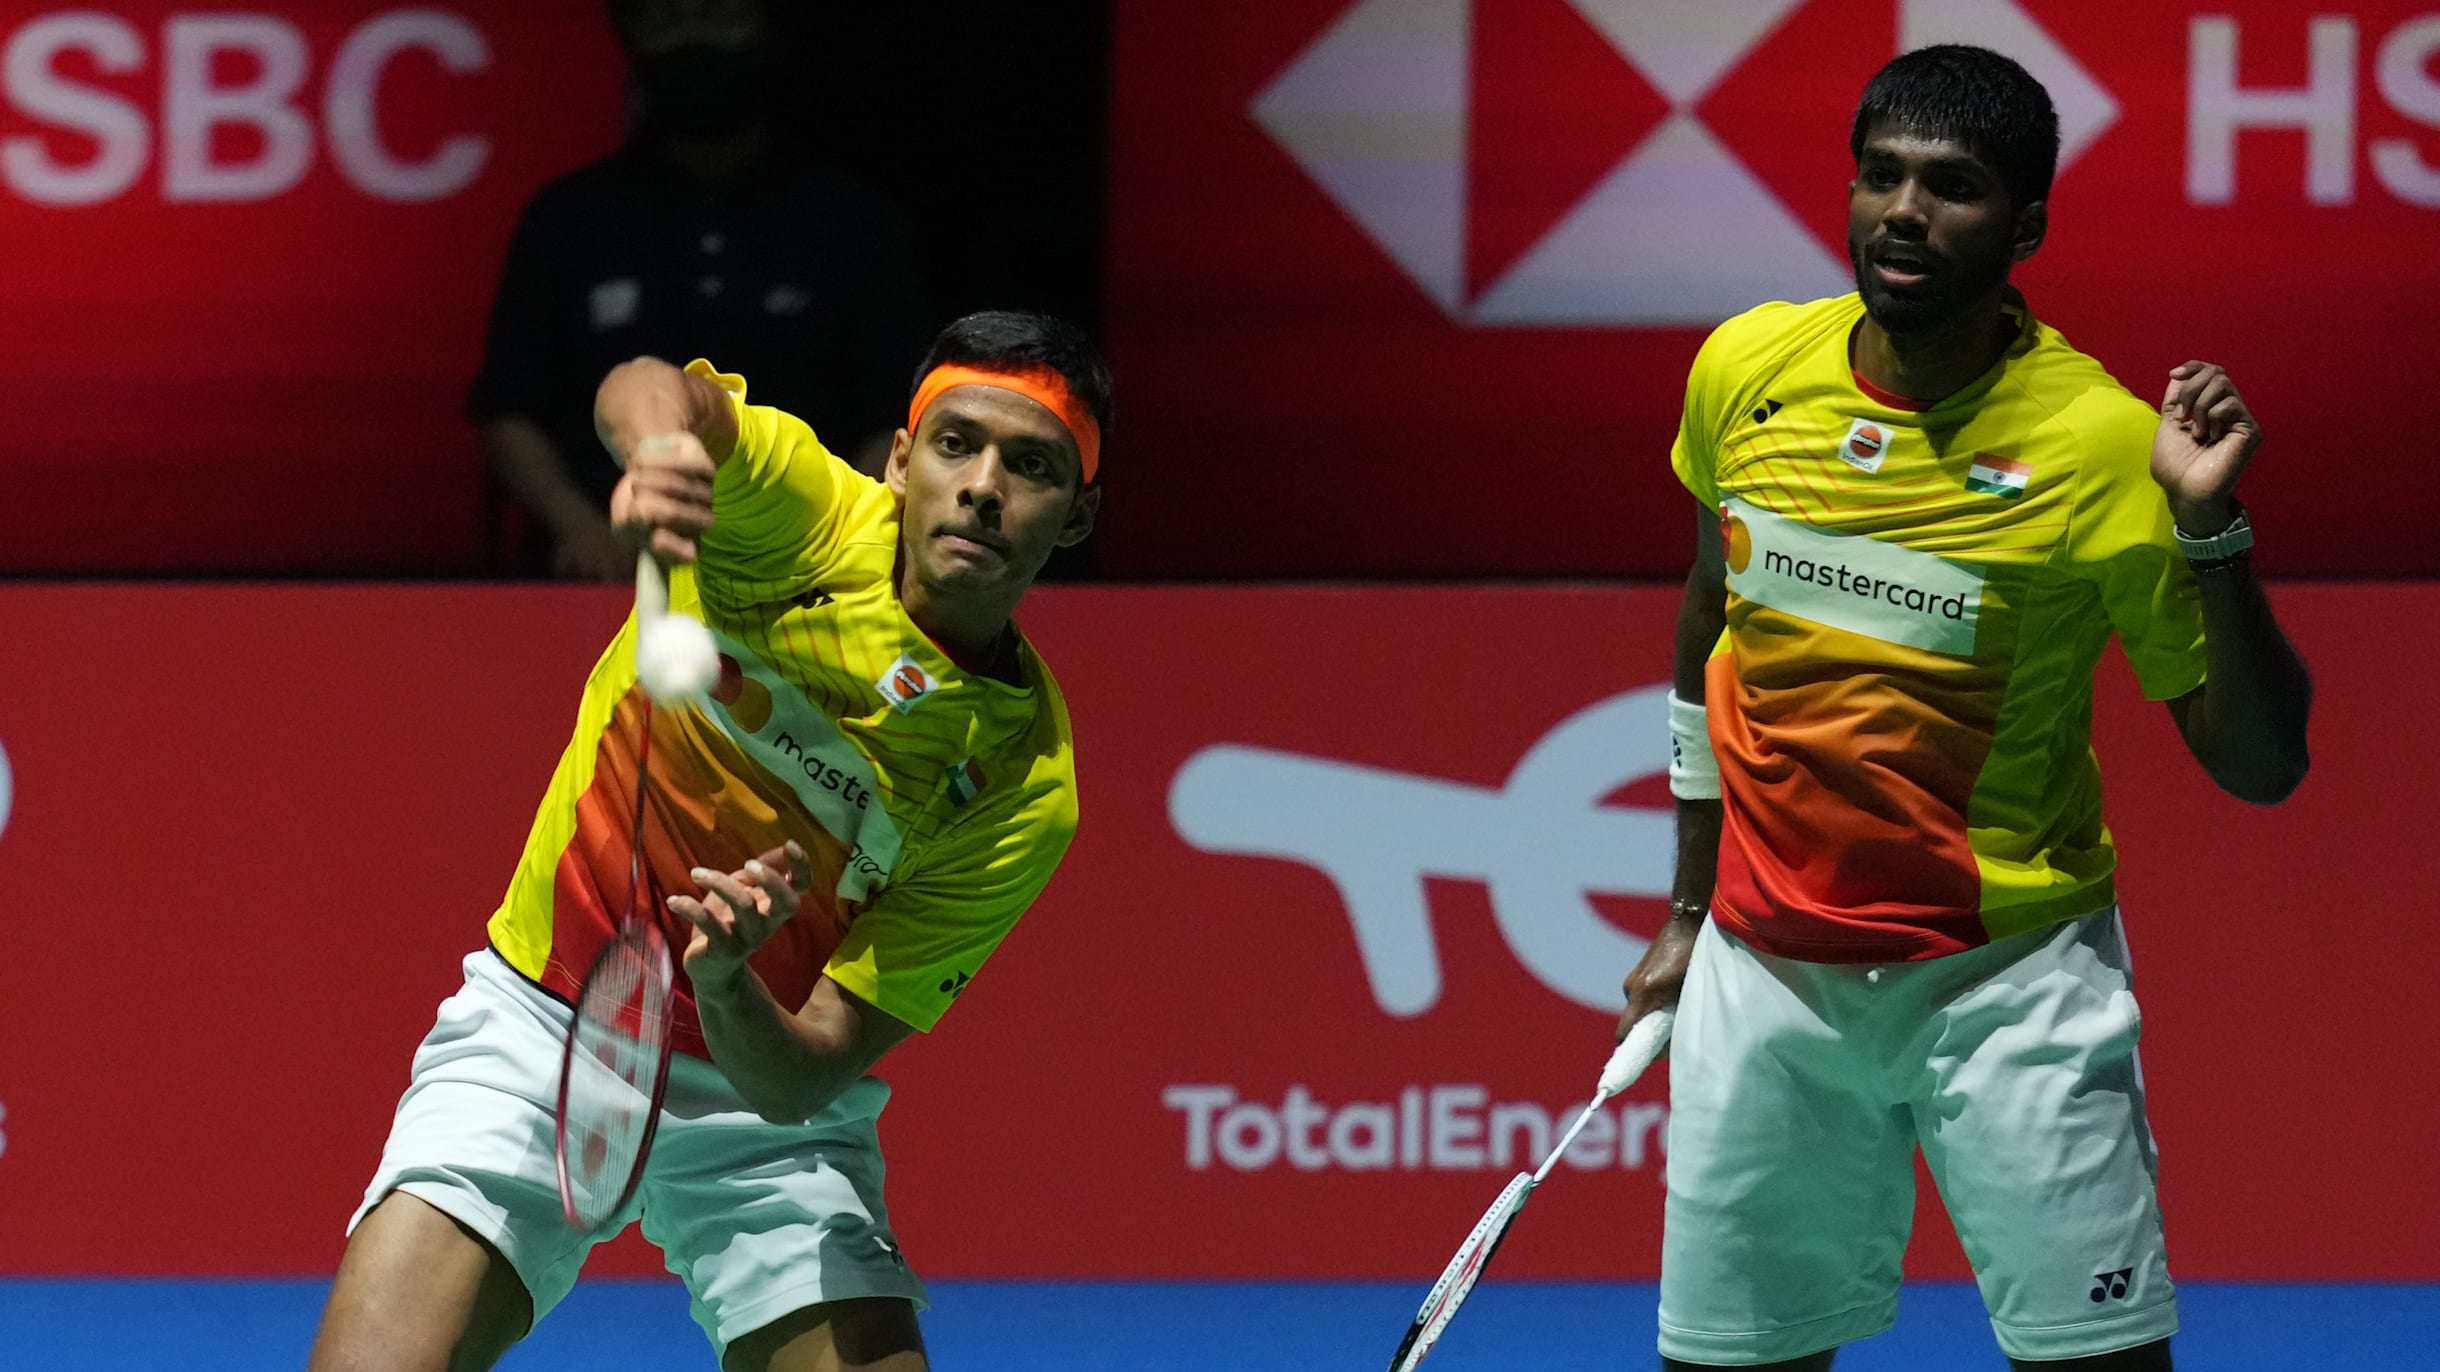 French Open 2022 badminton Kidambi Srikanth knocked out